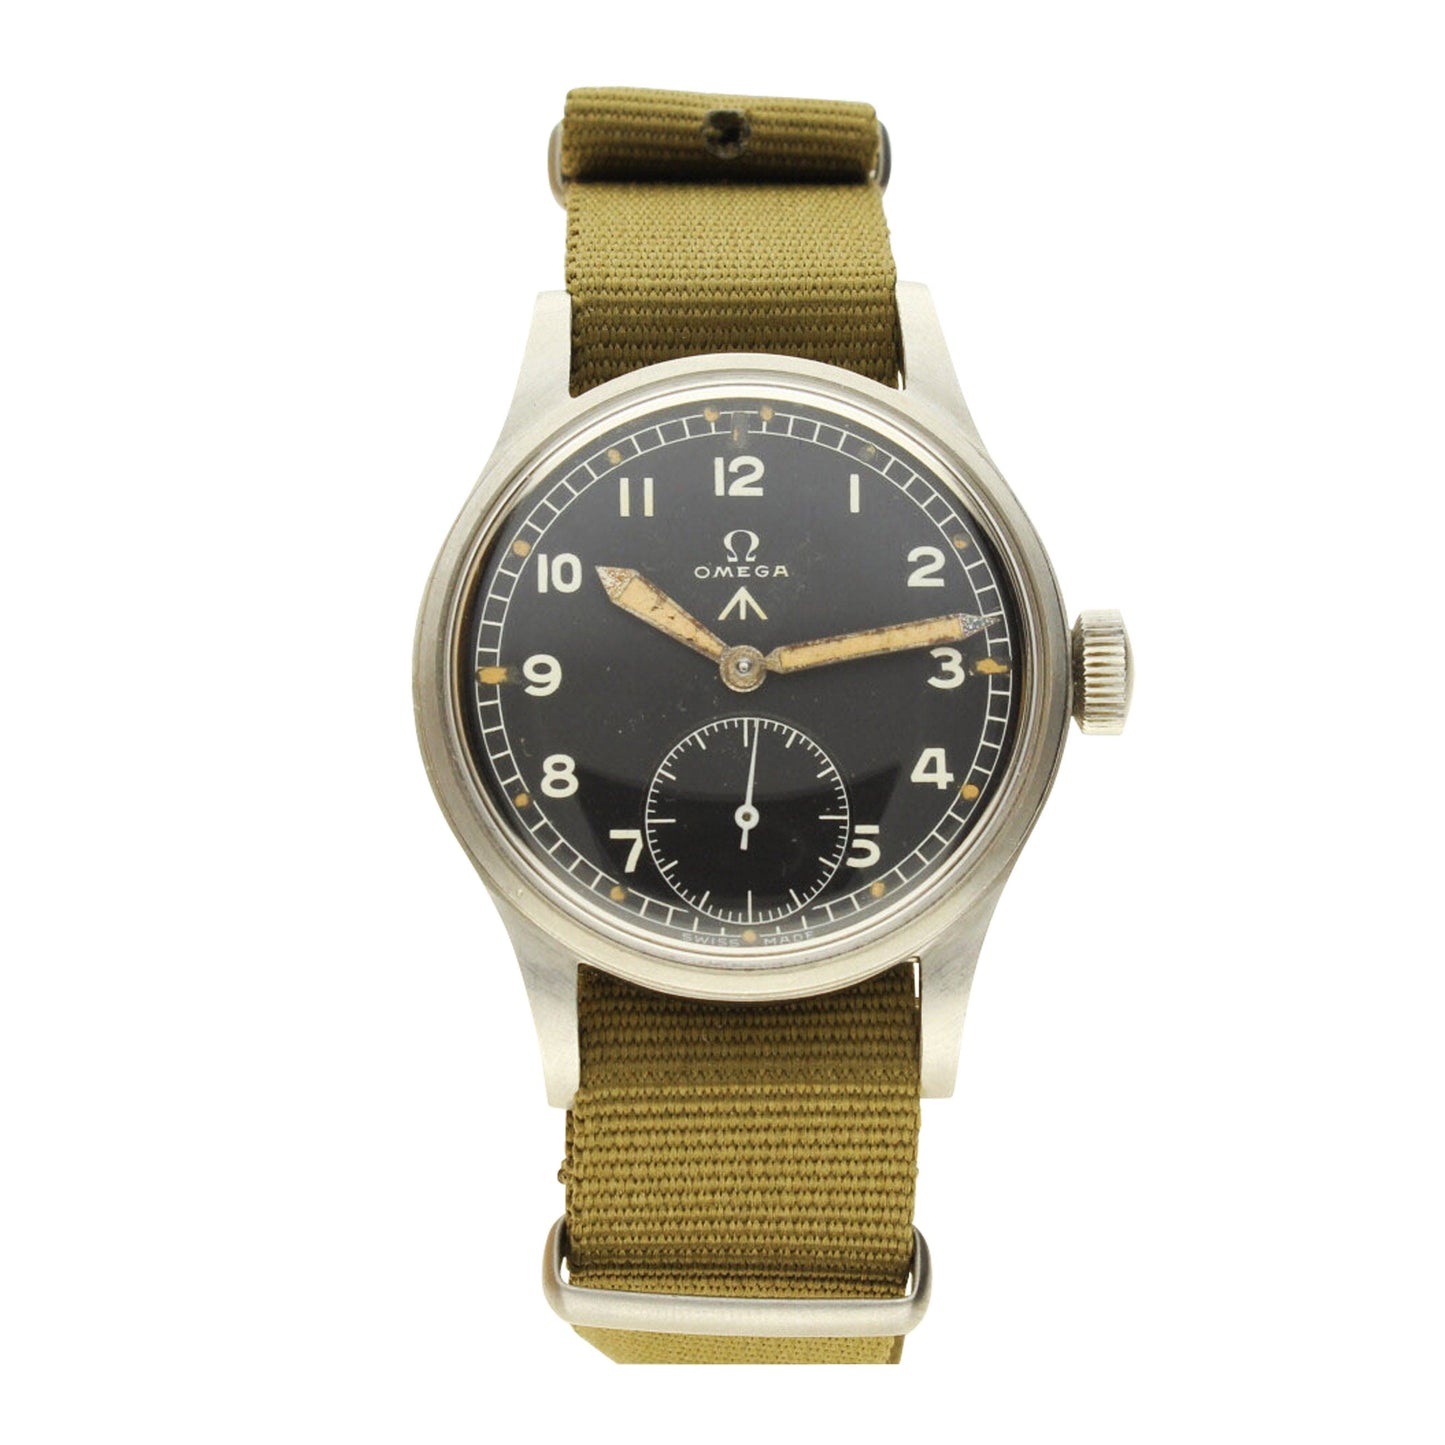 Stainless steel British military watch, part of the "Dirty dozen". Made 1945